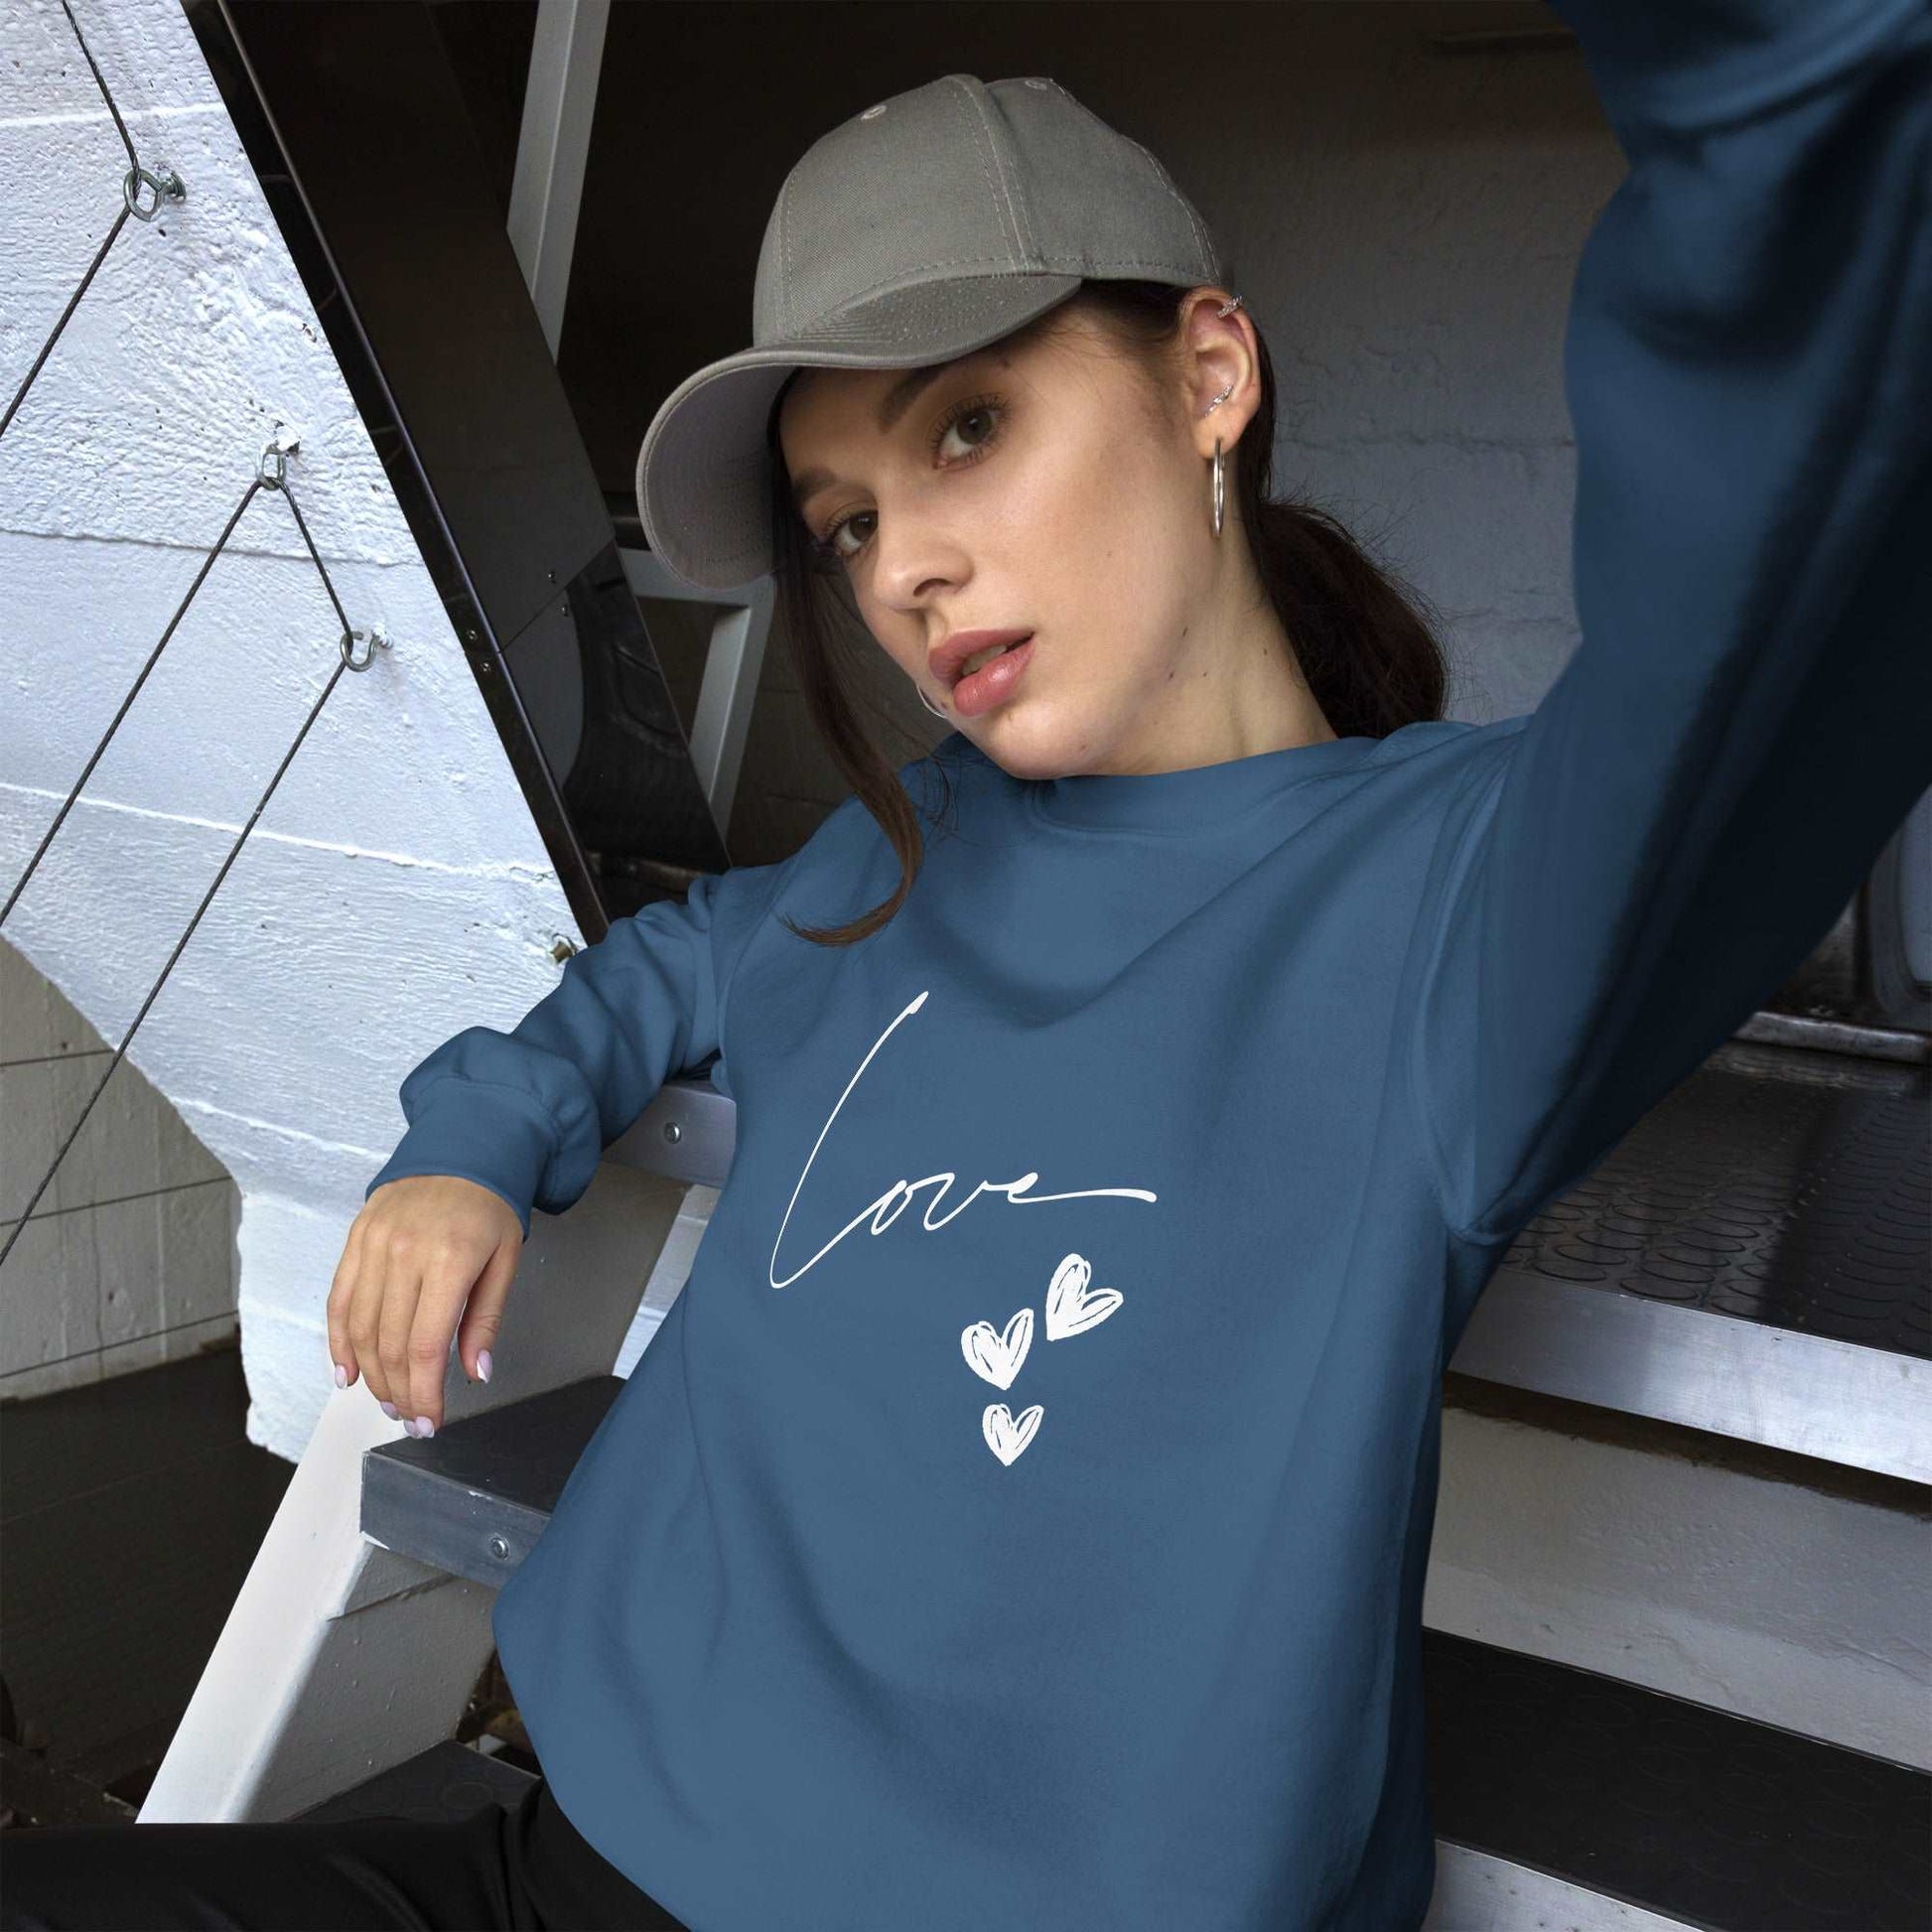 Love Handcrafted Unisex Sweatshirts: Unique Designs for All - Available in All Sizes!"